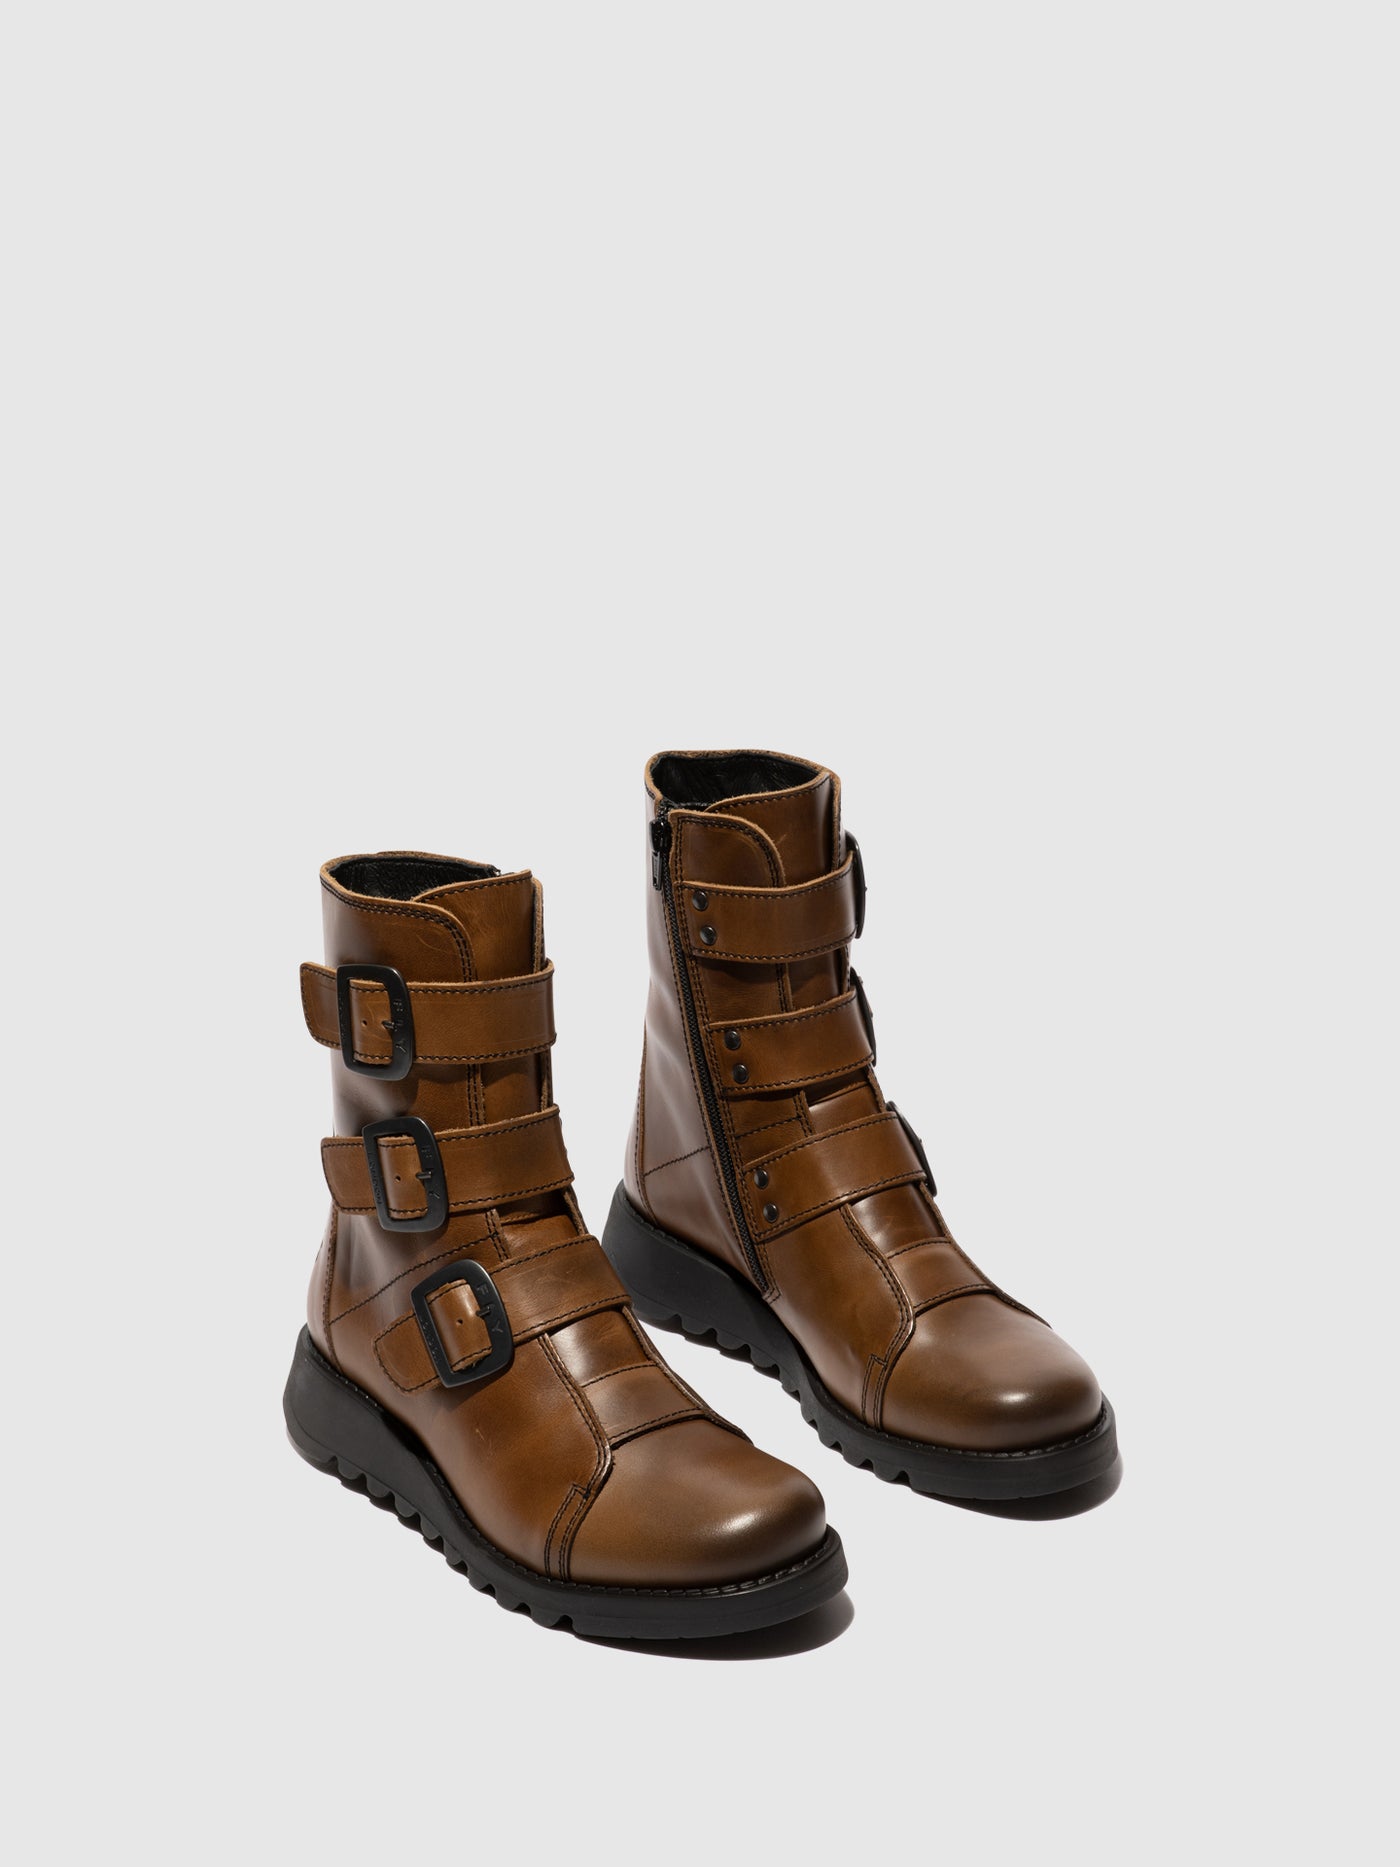 Buckle Ankle Boots SCOP110FLY CAMEL (BLACK SOLE)